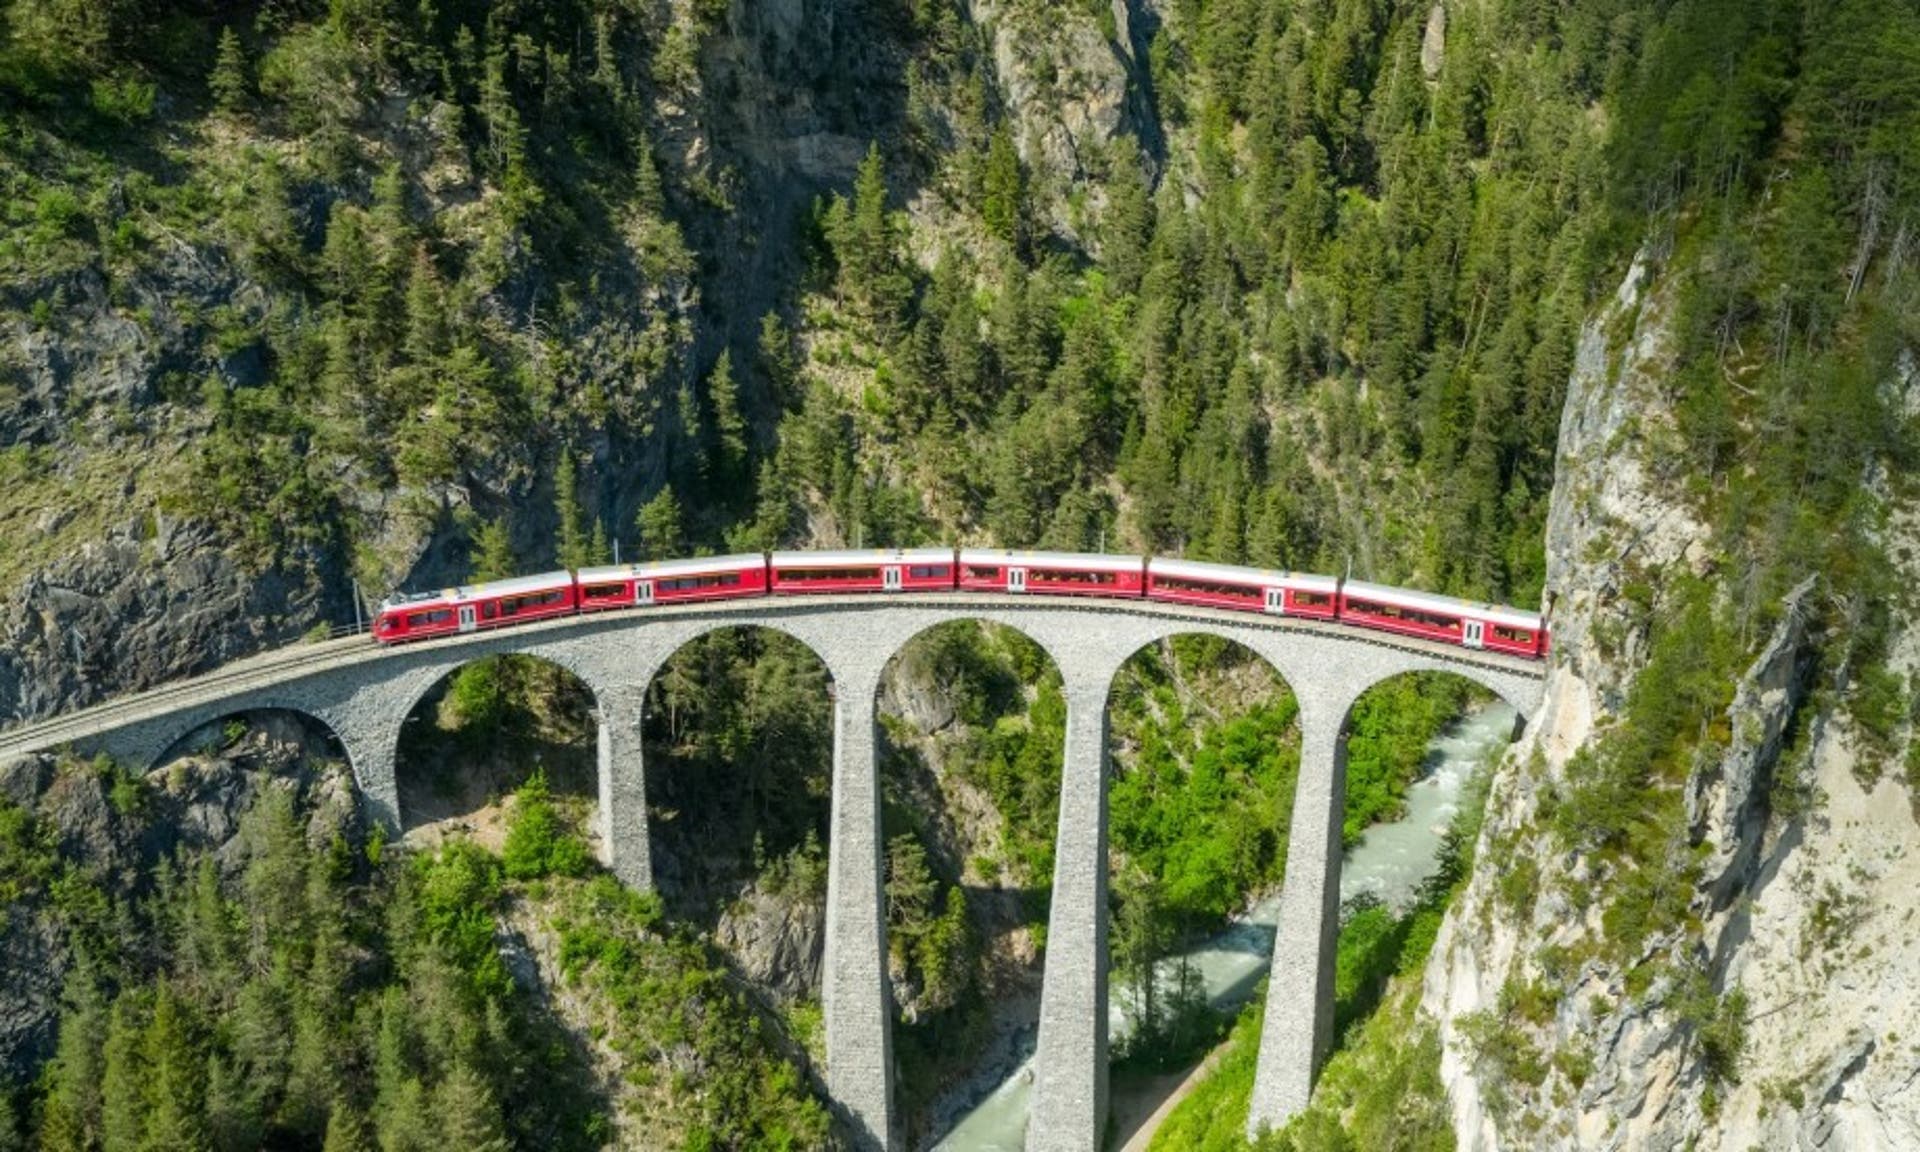  aerial shot of a train travelling along a scenic route in Switzerland 